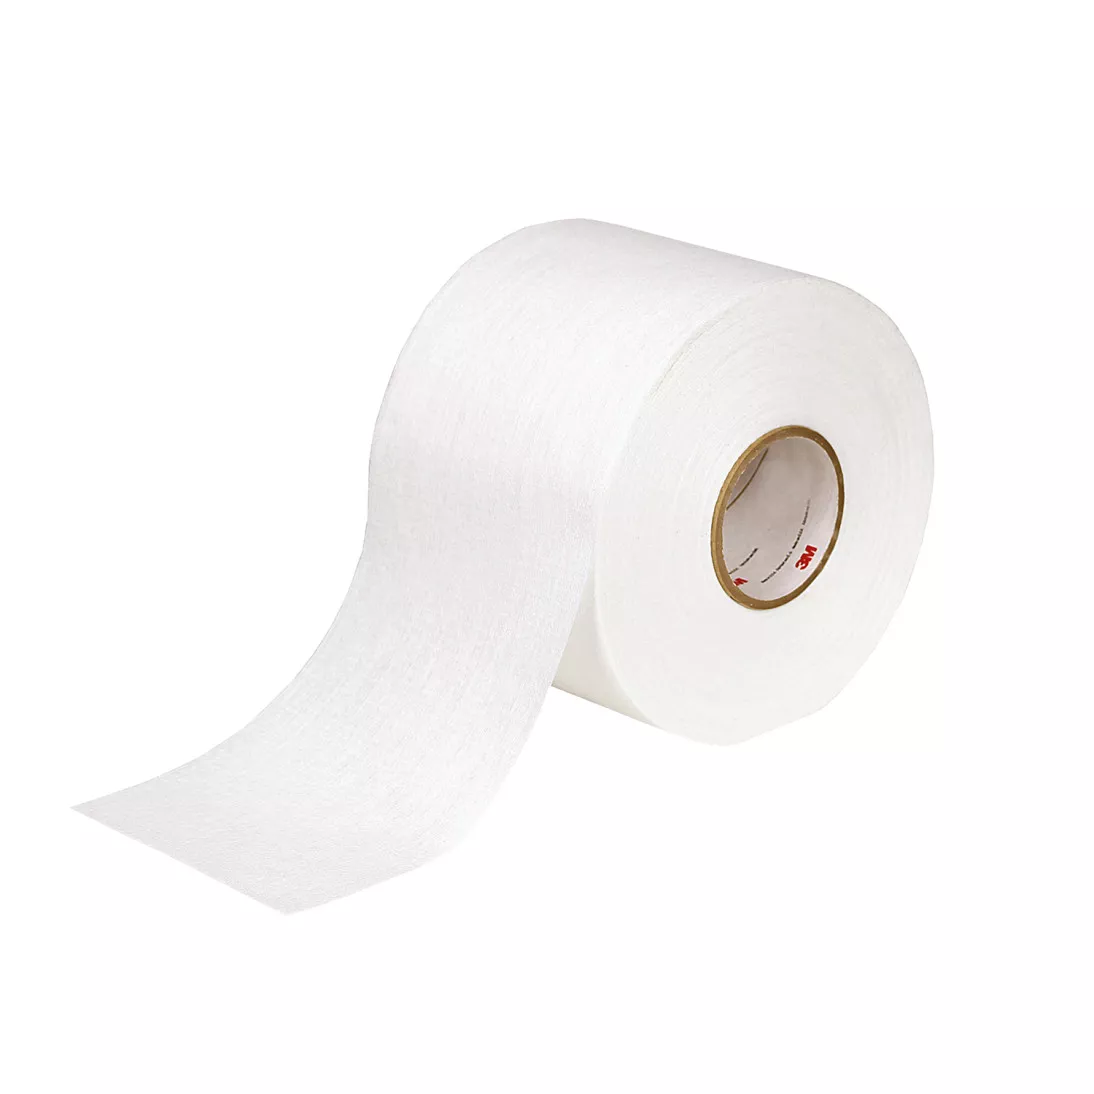 3M™ Dirt Trap Protection Material, 36850, White, 6 in x 300 ft, 4 per
case